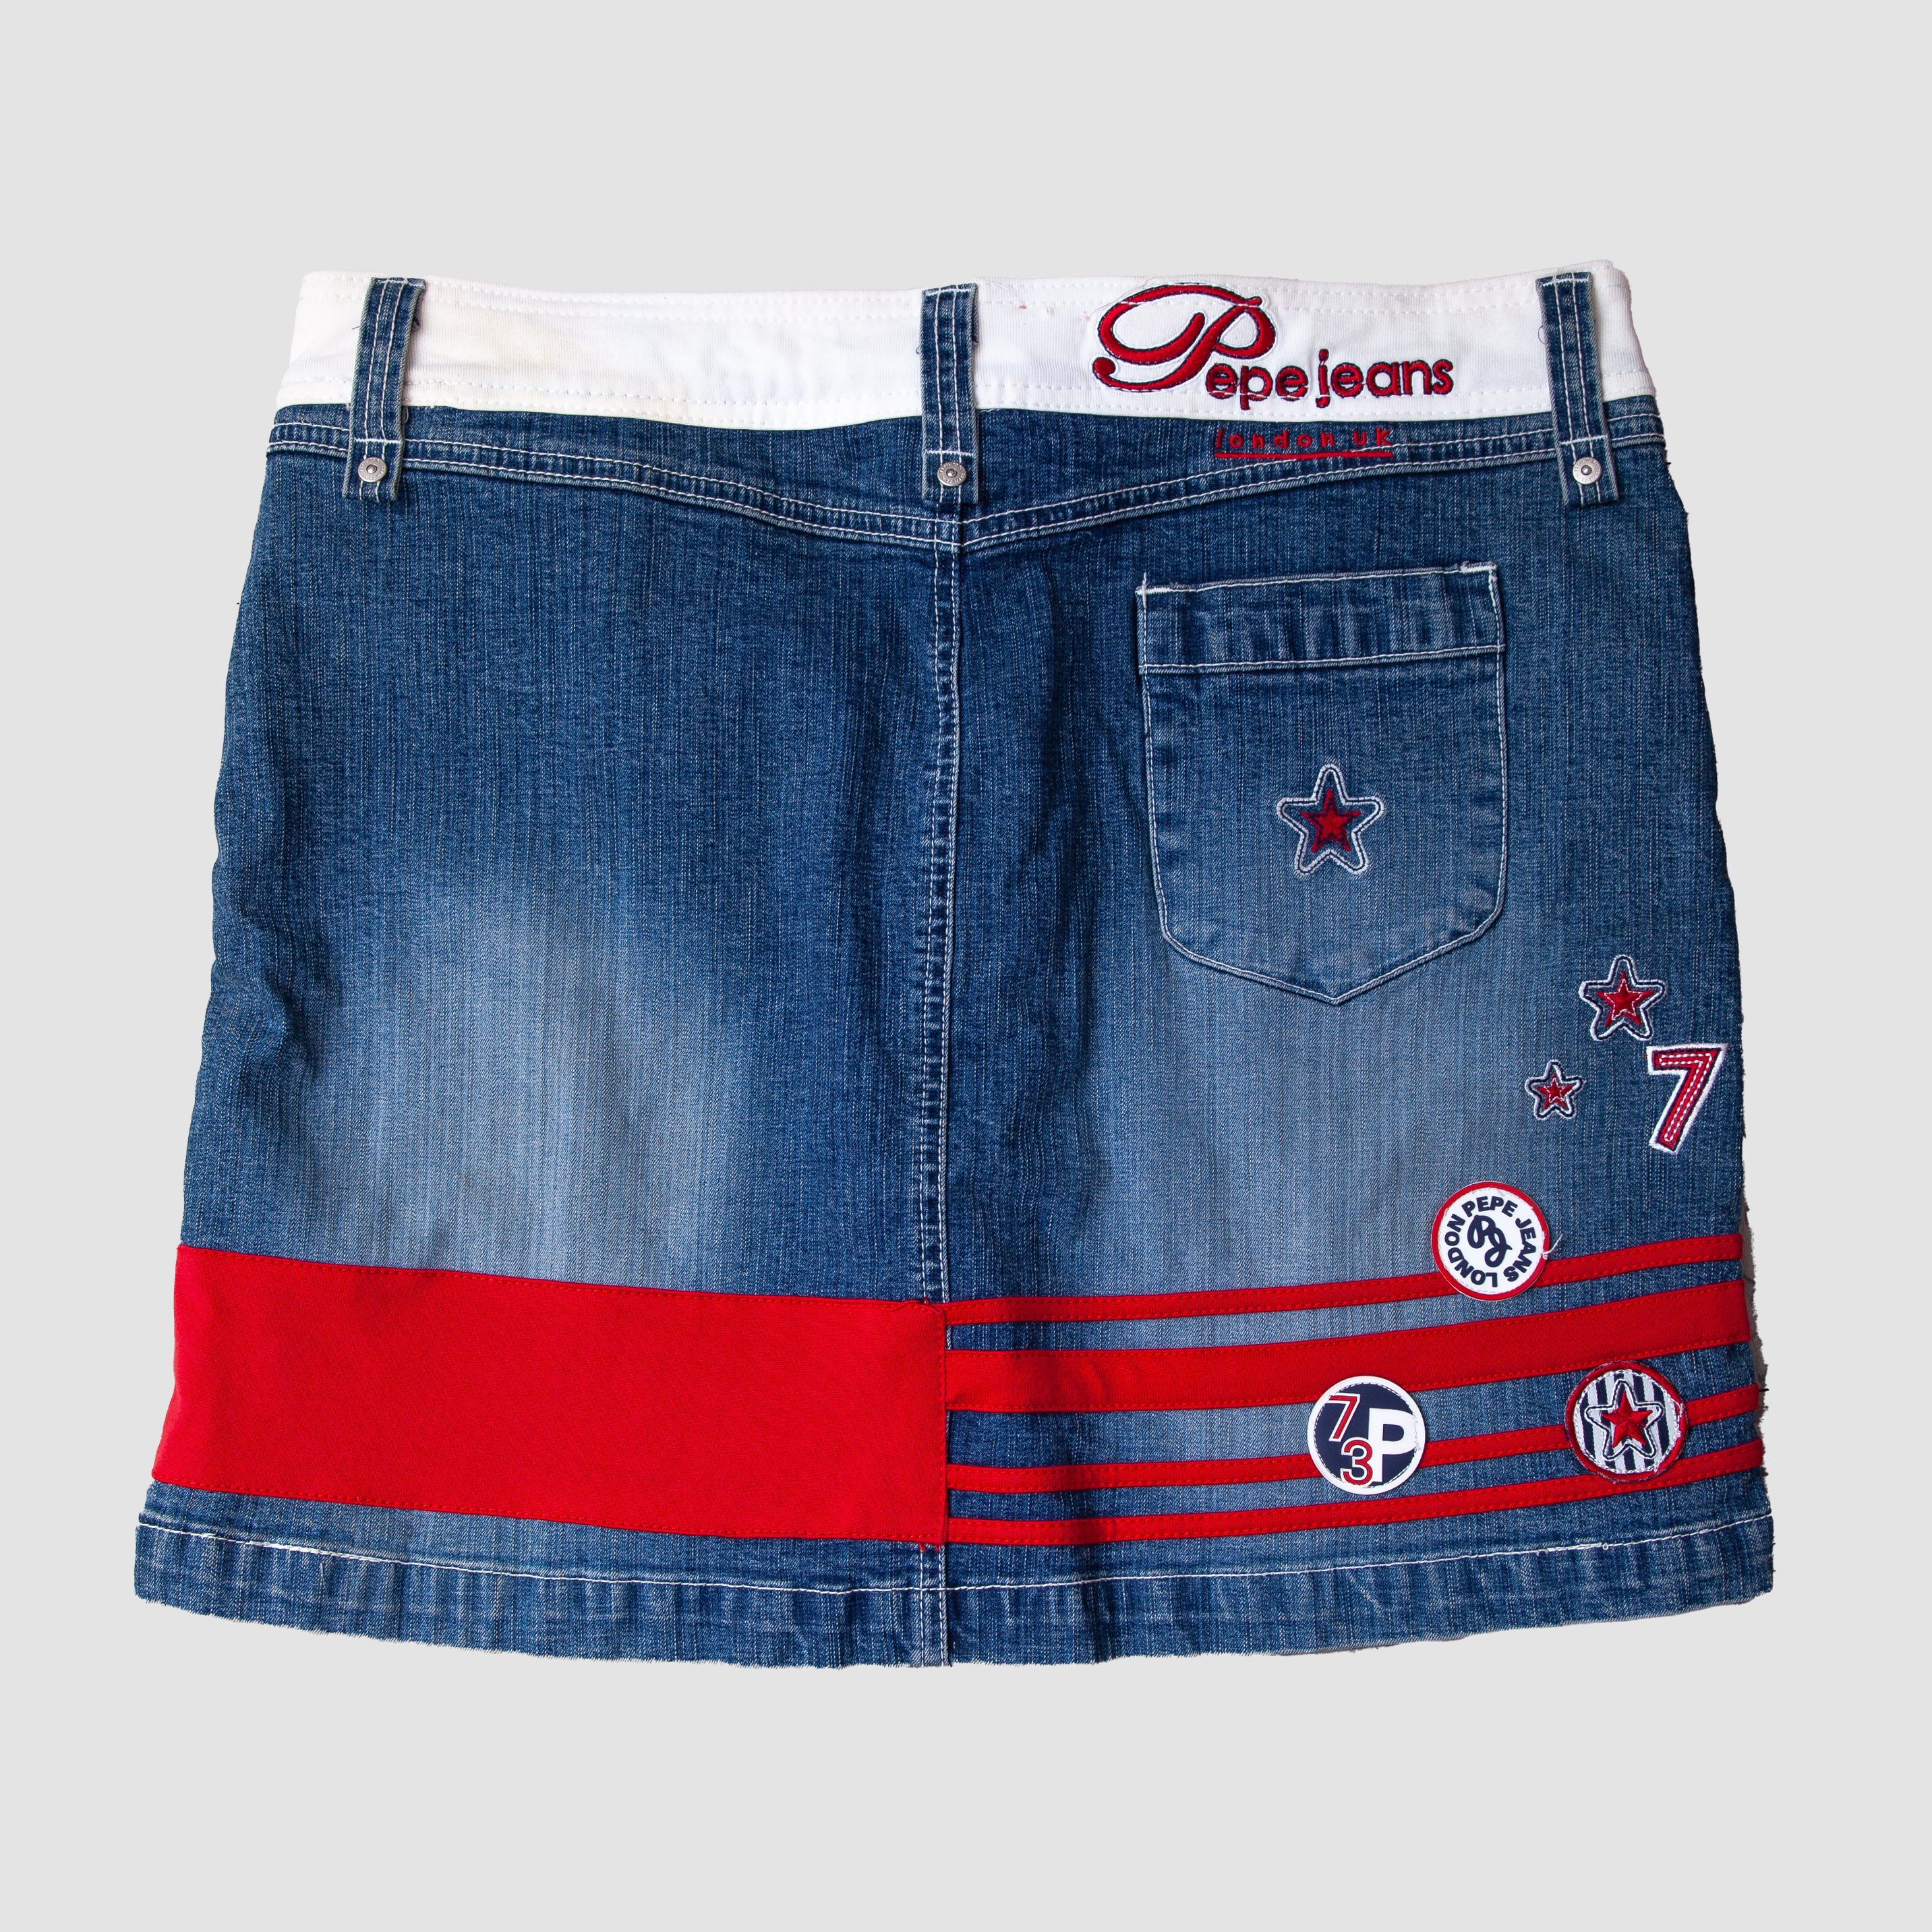 Buy Blue Skirts for Women by Pepe Jeans Online | Ajio.com